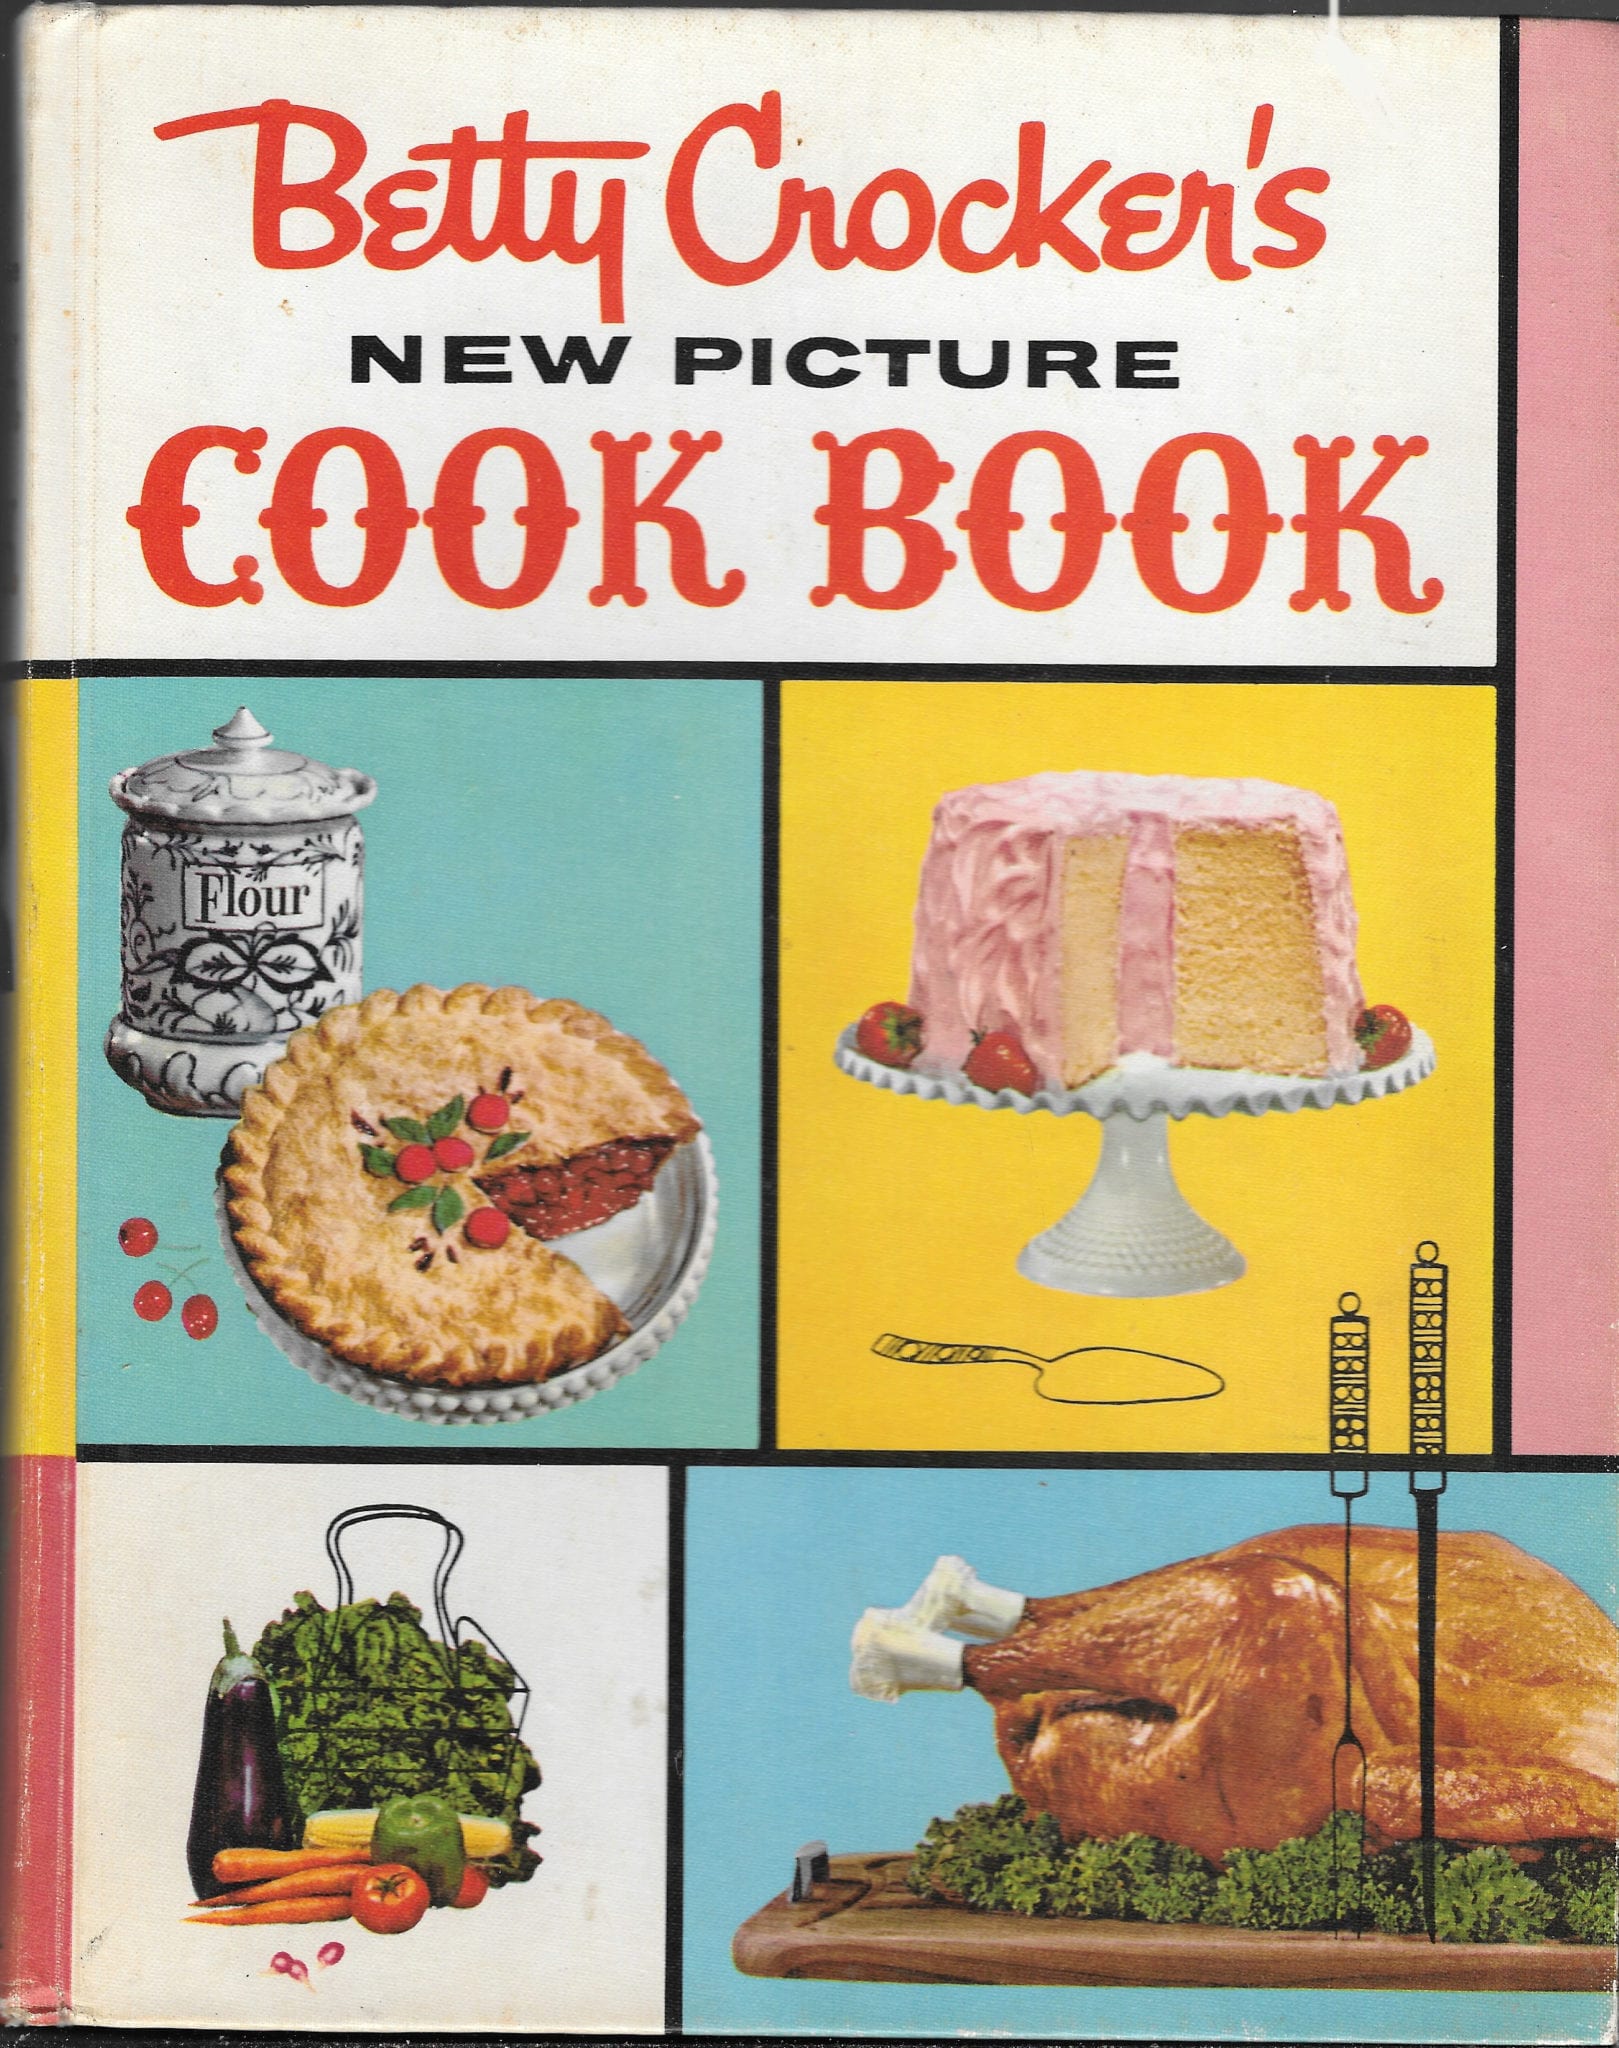 Betty Crocker's New Picture Cook Book 1961 in As-If-New Condition